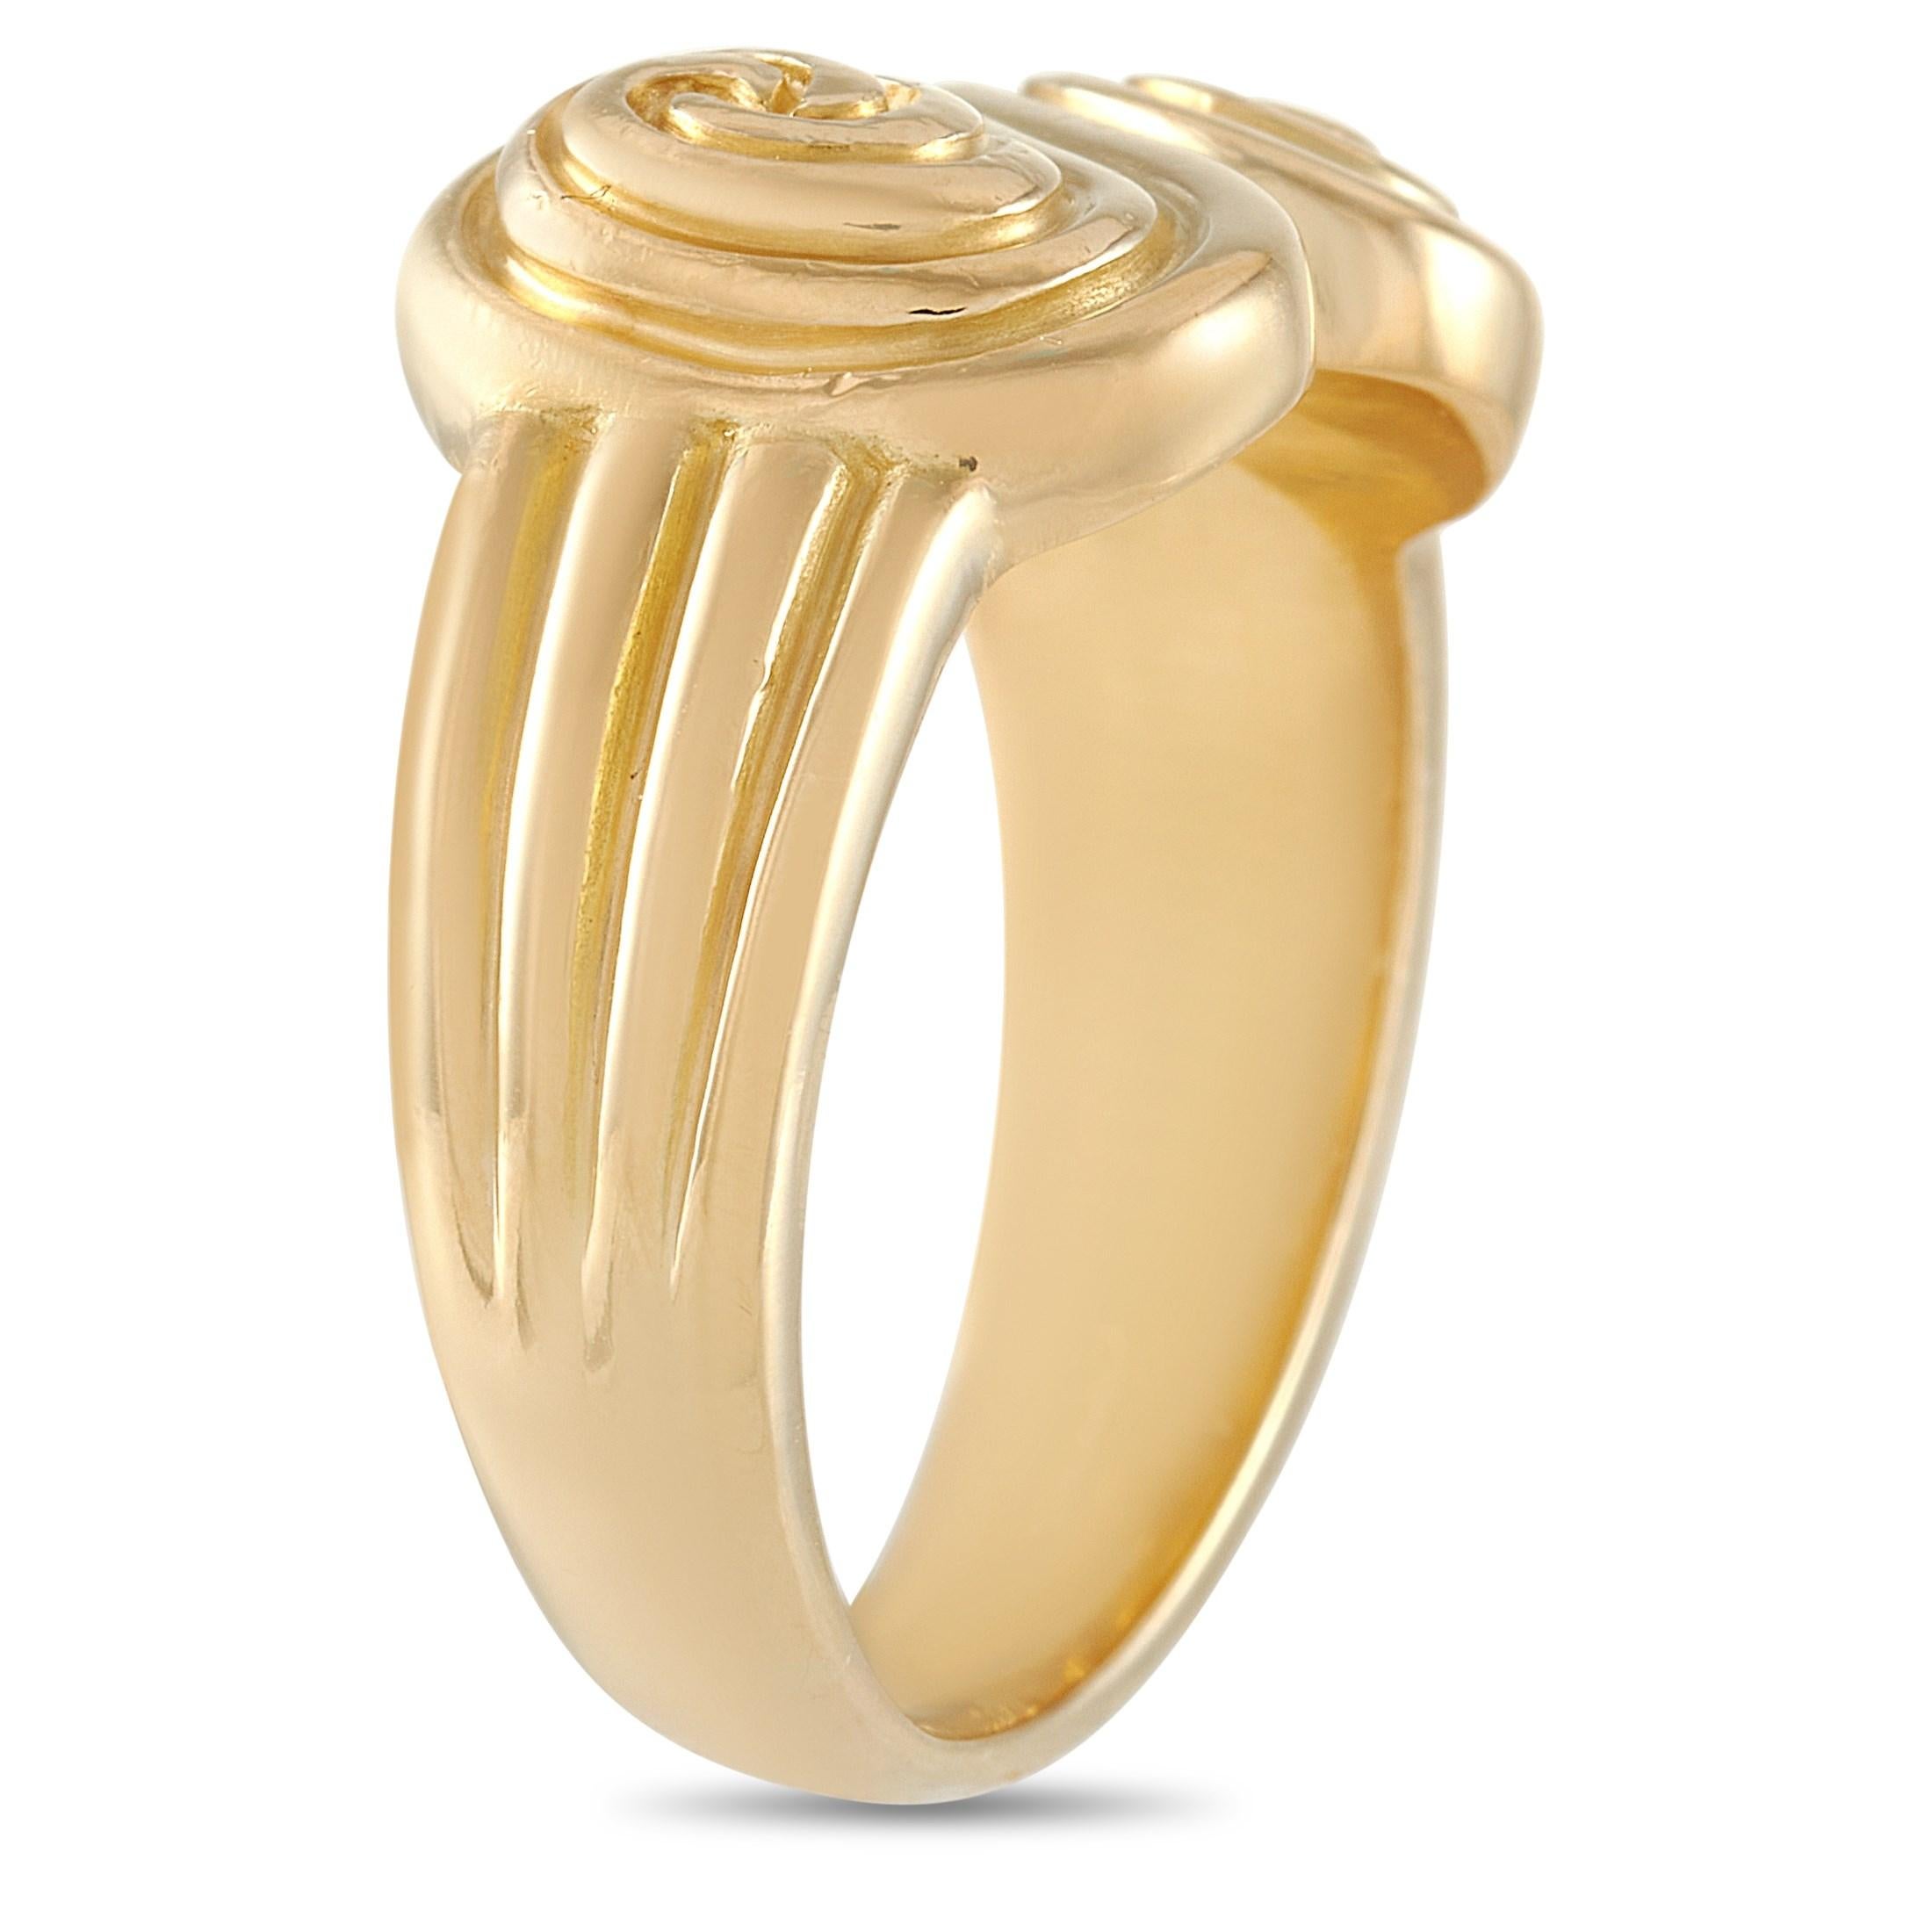 This Tiffany & Co. ring is crafted from 18K yellow gold. It’s unique, stylish, and beautiful. It weighs 9.7 grams and boasts of band thickness of 2mm, a top height of 3mm, and measures 10 by 15 mm. 
The ring is offered in estate condition and comes